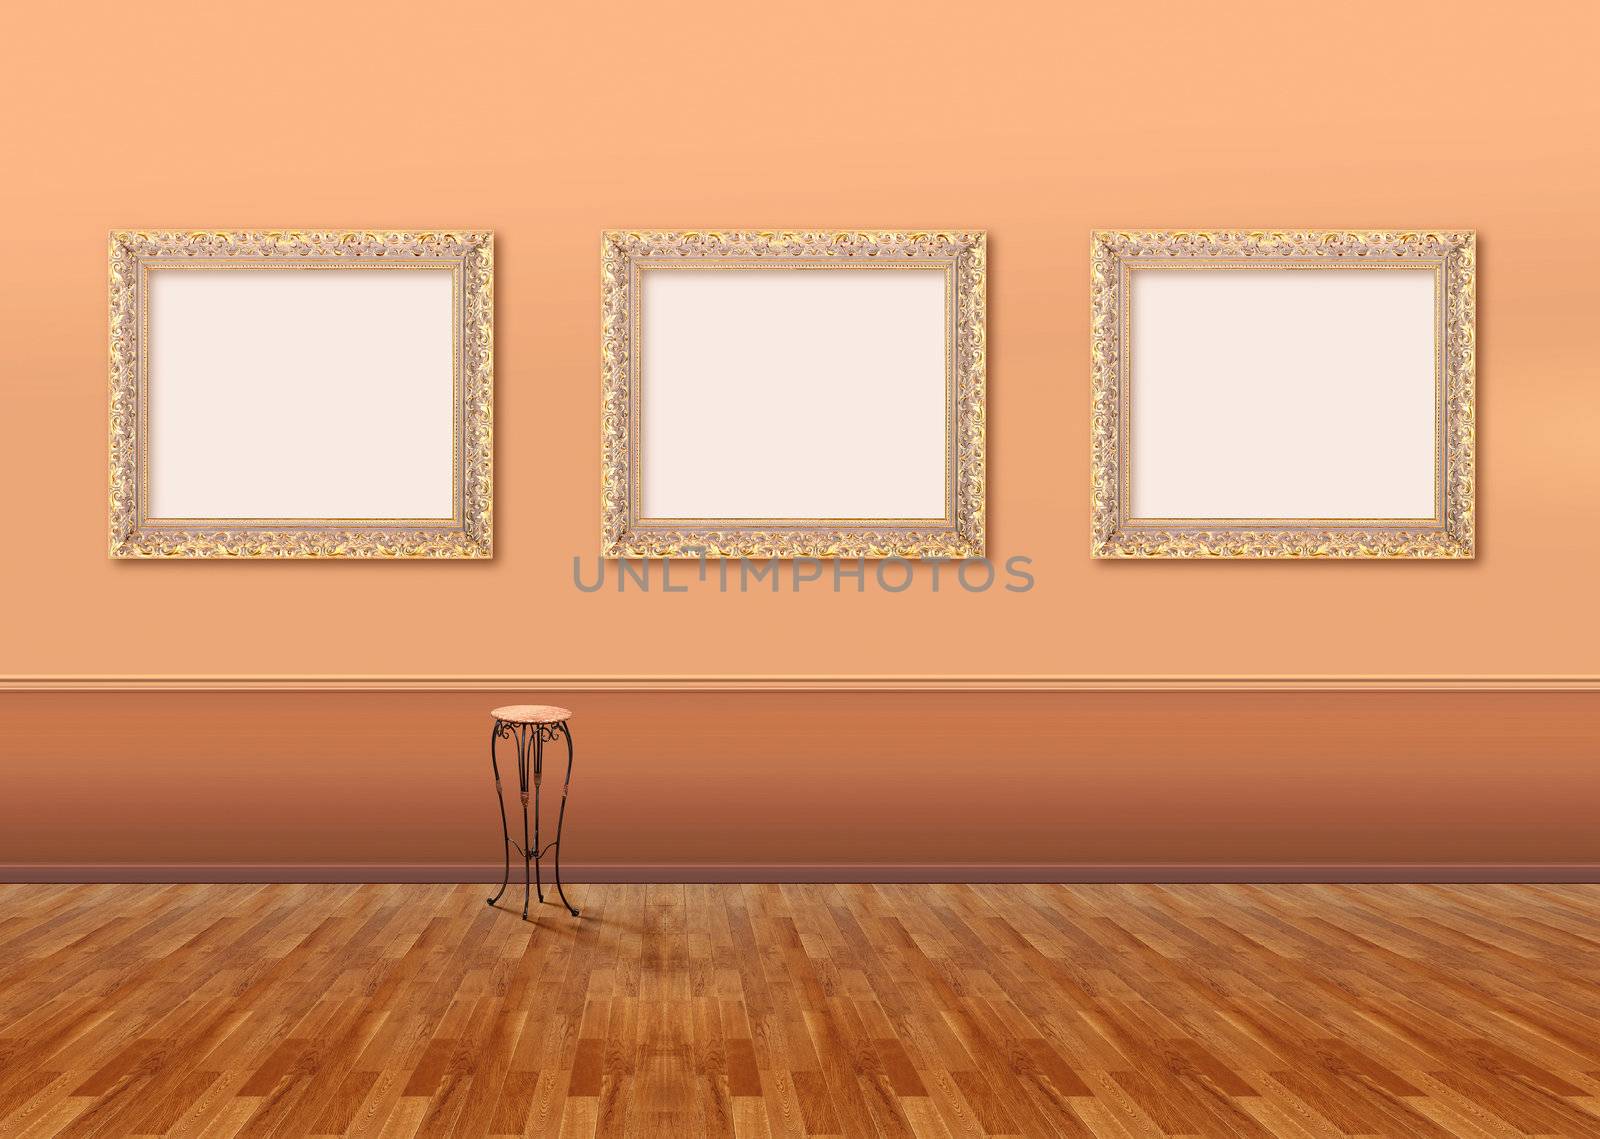 Contemporary museum gallery interior, blank paintings and photographs